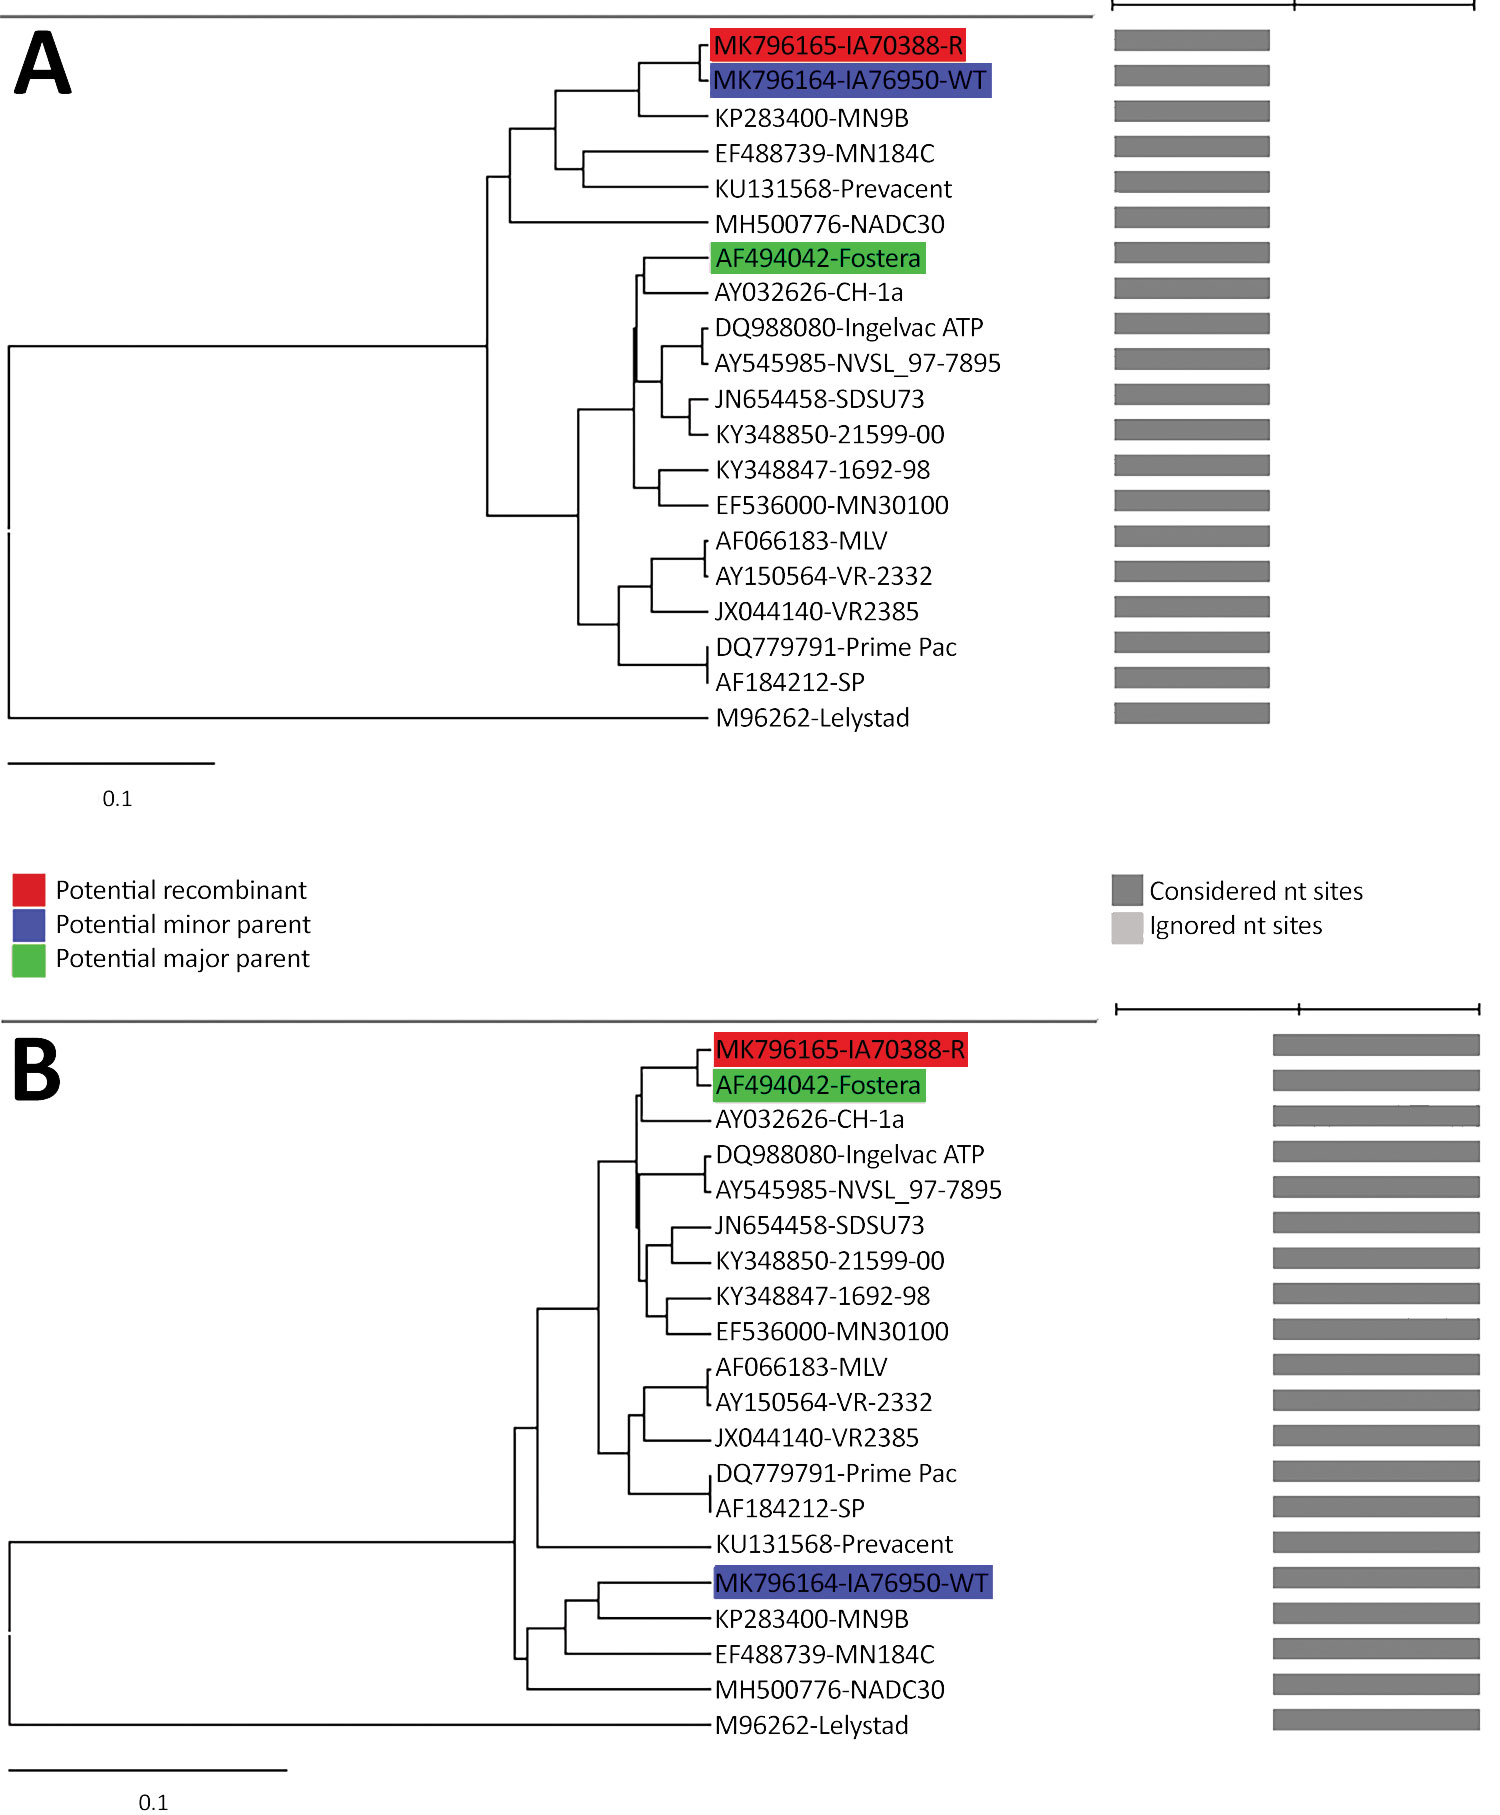 Genome recombination analysis of the IA70388-R strain of porcine reproductive and respiratory syndrome virus, United States, 2018. A) UPGMA of region derived from major parent (1–6742). B) UPGMA of region derived from major parent (6743–15642 nt). Phylogenies of the parent strains were identified using RDP version 4.24 software (http://web.cbio.uct.ac.za/~darren/rdp.html). Red indicates the recombinant (IA70388-R); green indicates the major parent strain (the Fostera vaccine strain); blue indica